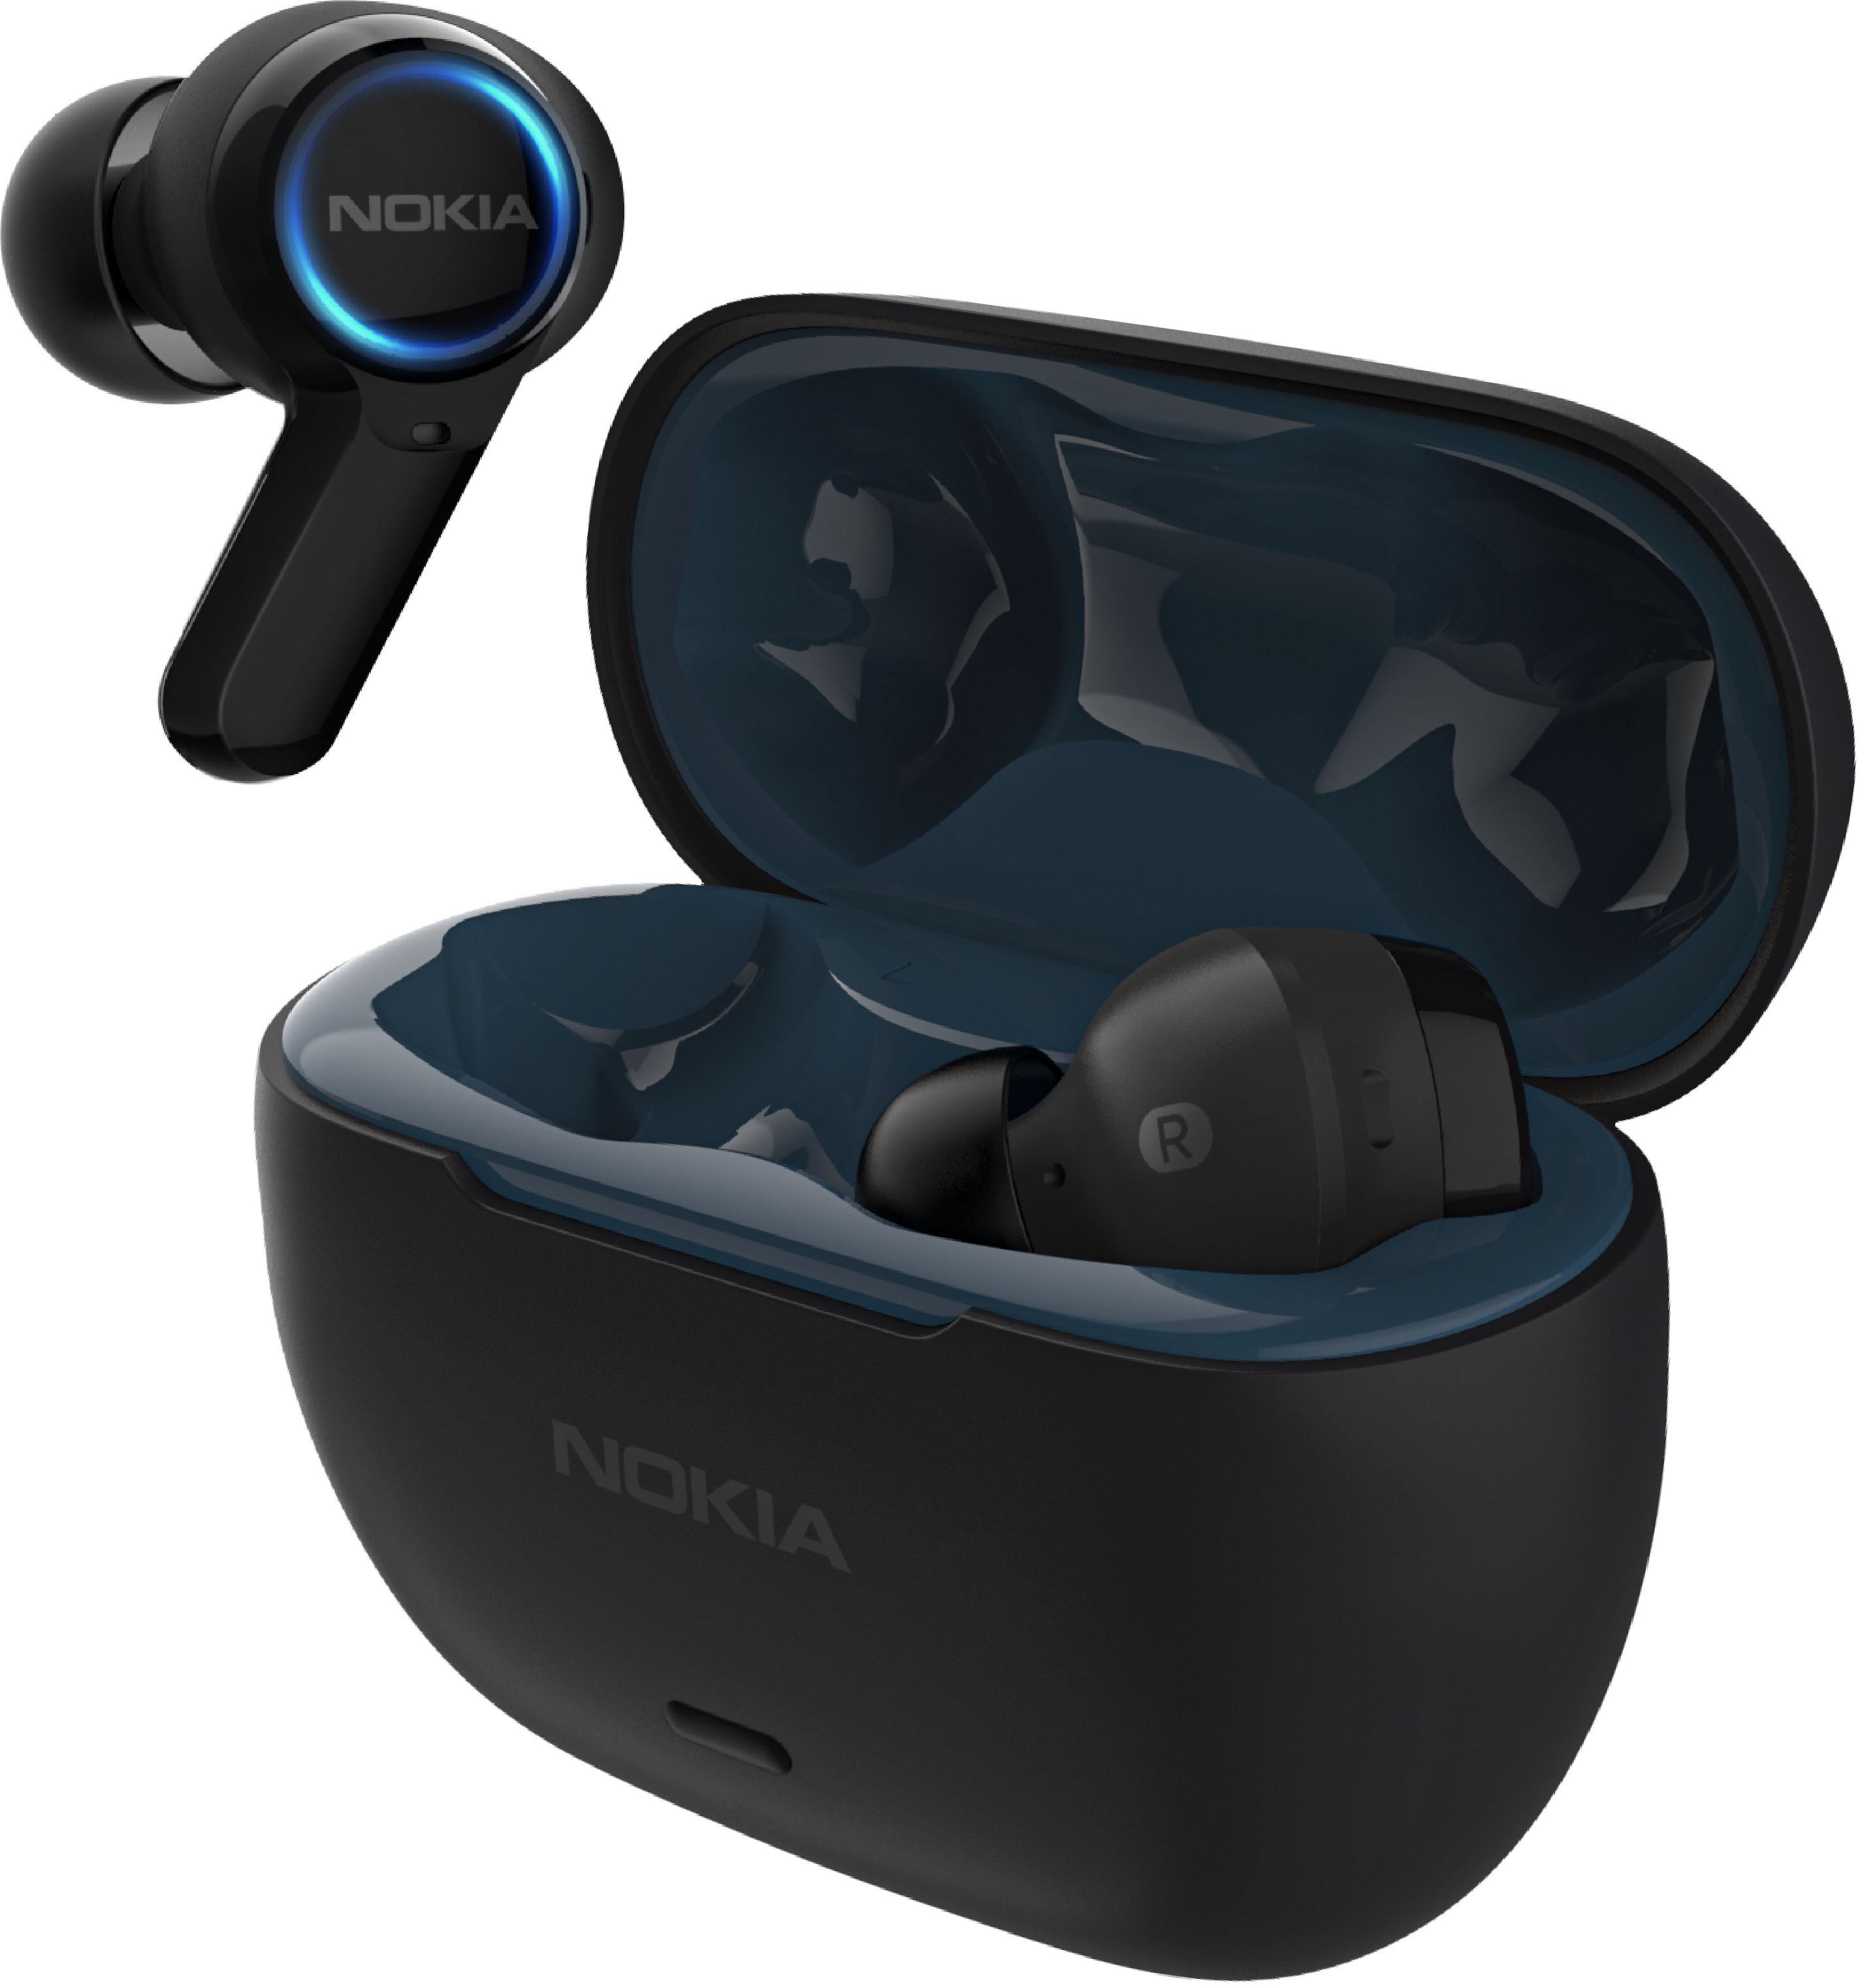 Nokia mobile phone accessories catalogue | Earbuds, wired and more